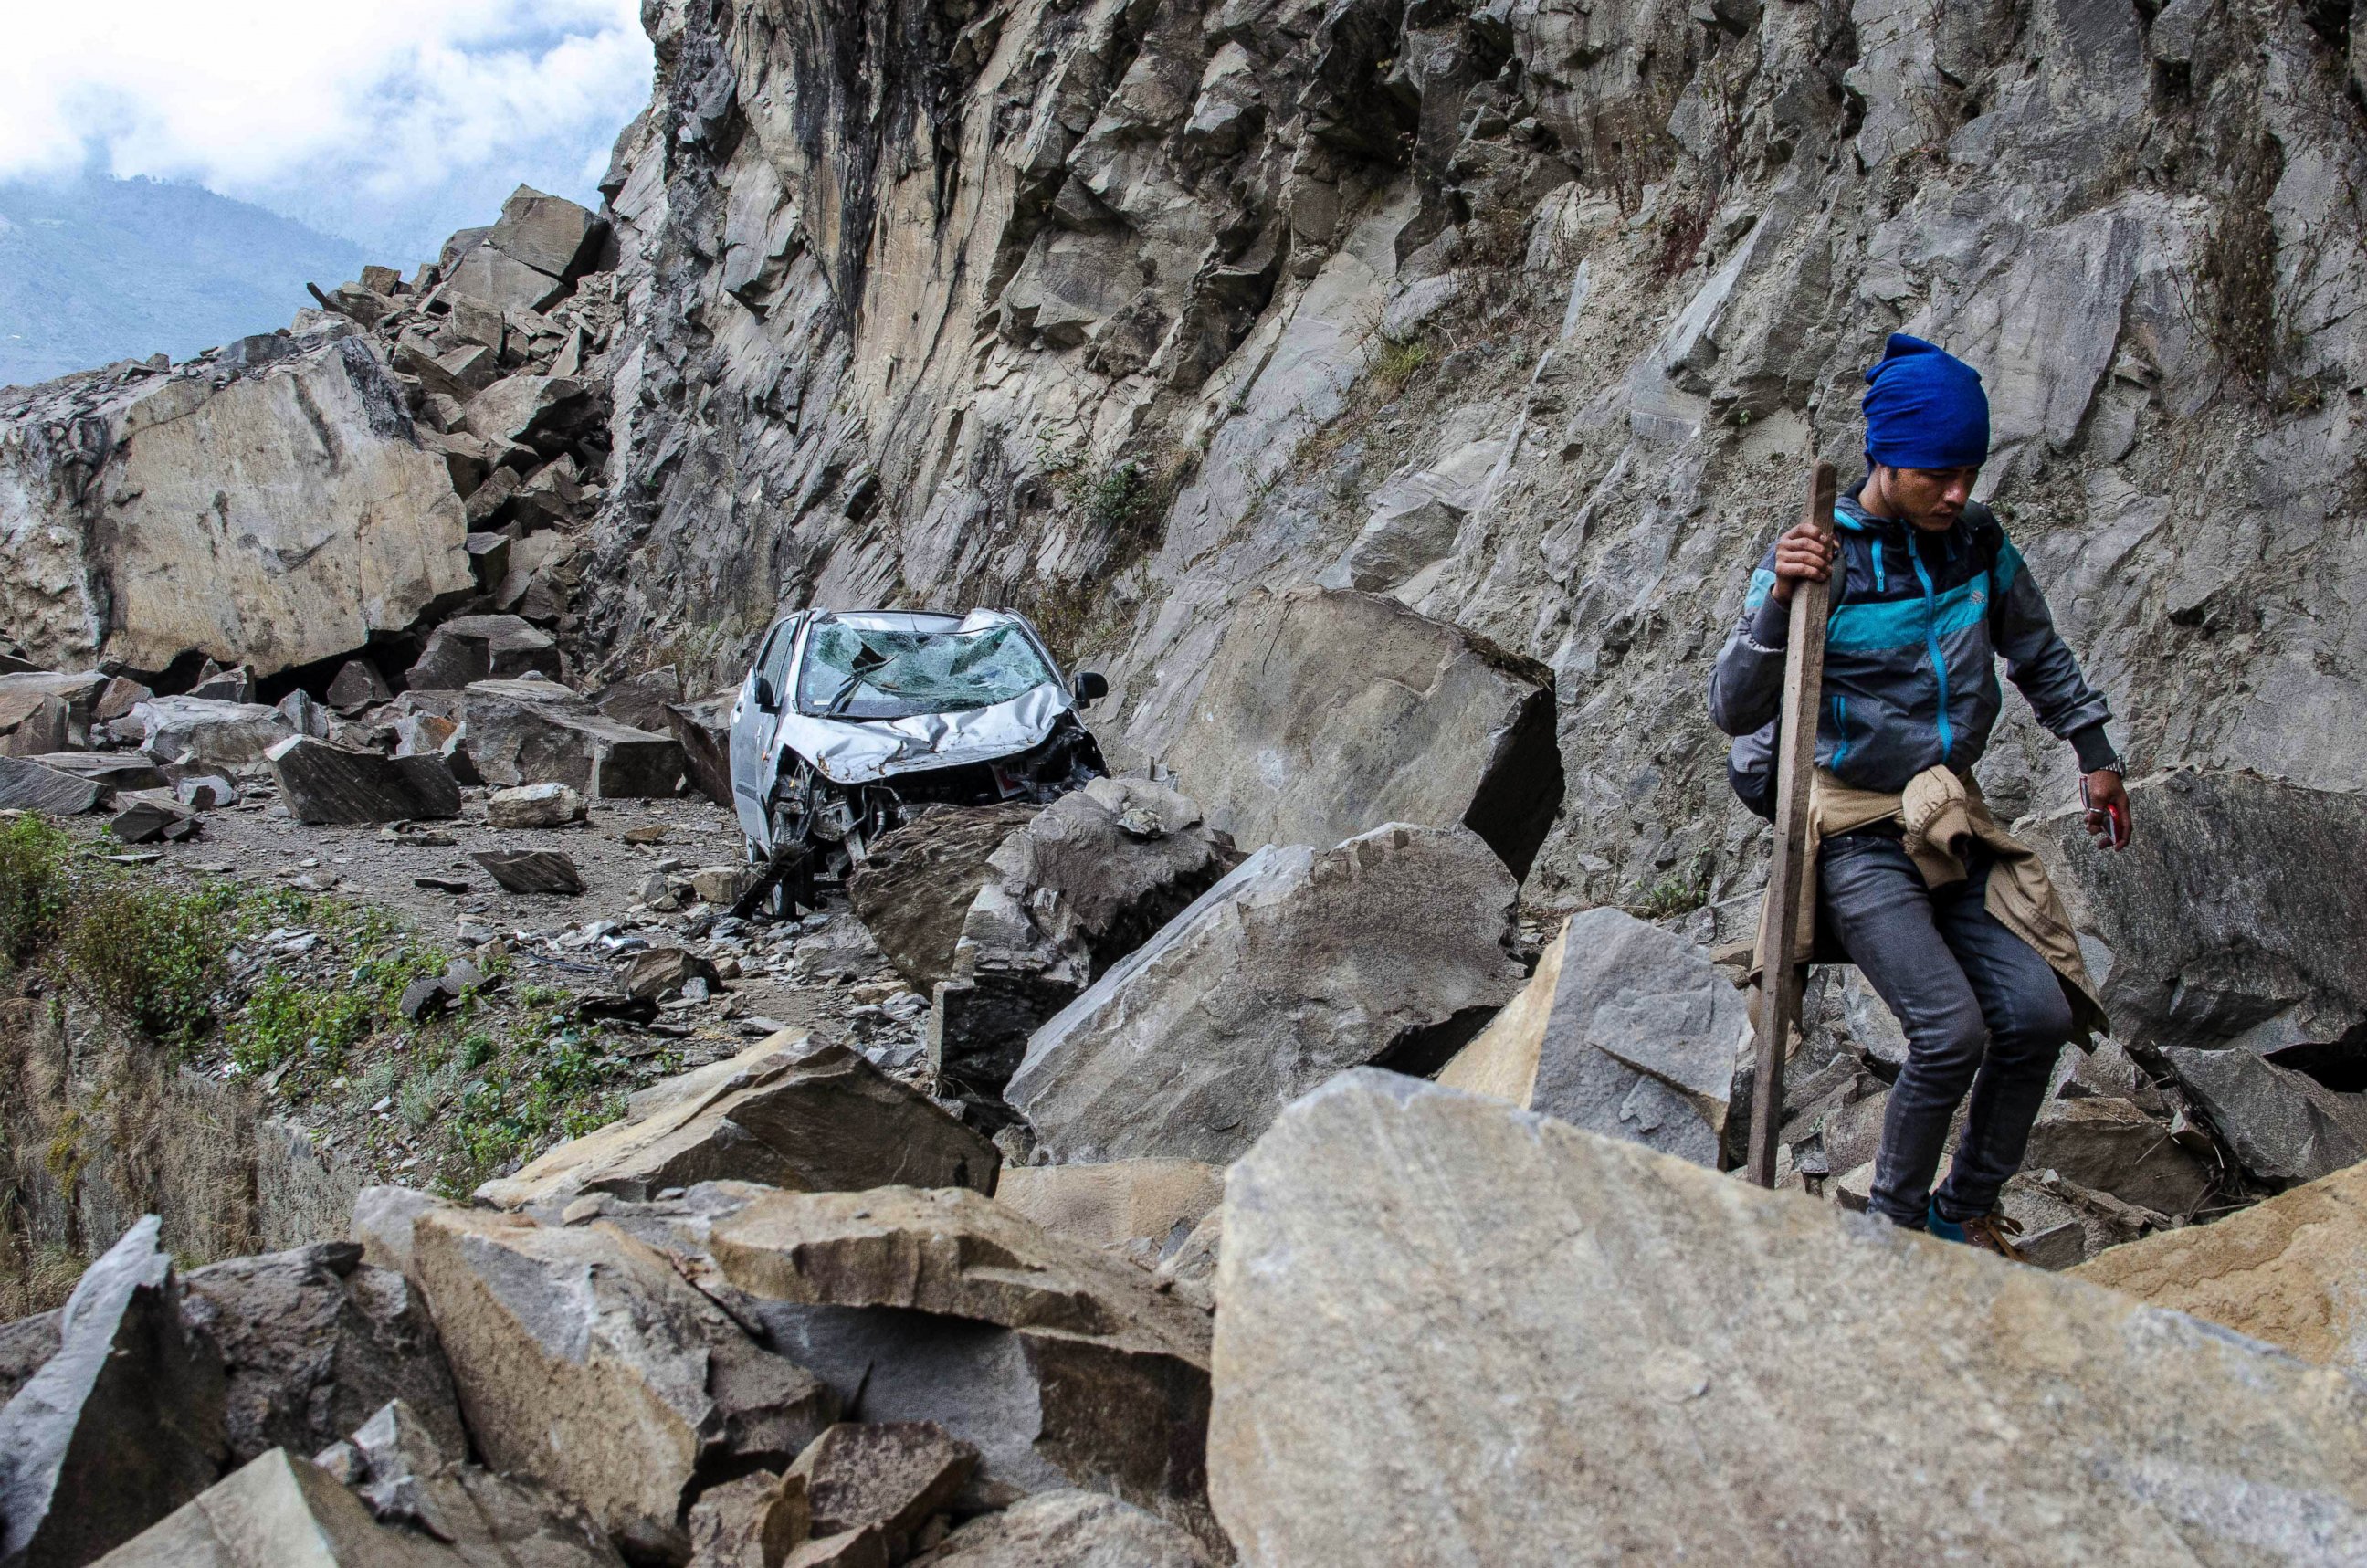 PHOTO: In this April 27, 2015 photo, a Nepalese man walks over fallen rocks and past a crushed car on the way to Dhunche, Nepal, a village in Langtang National Park, two days after a 7.8-magnatude earthquake hit the region.